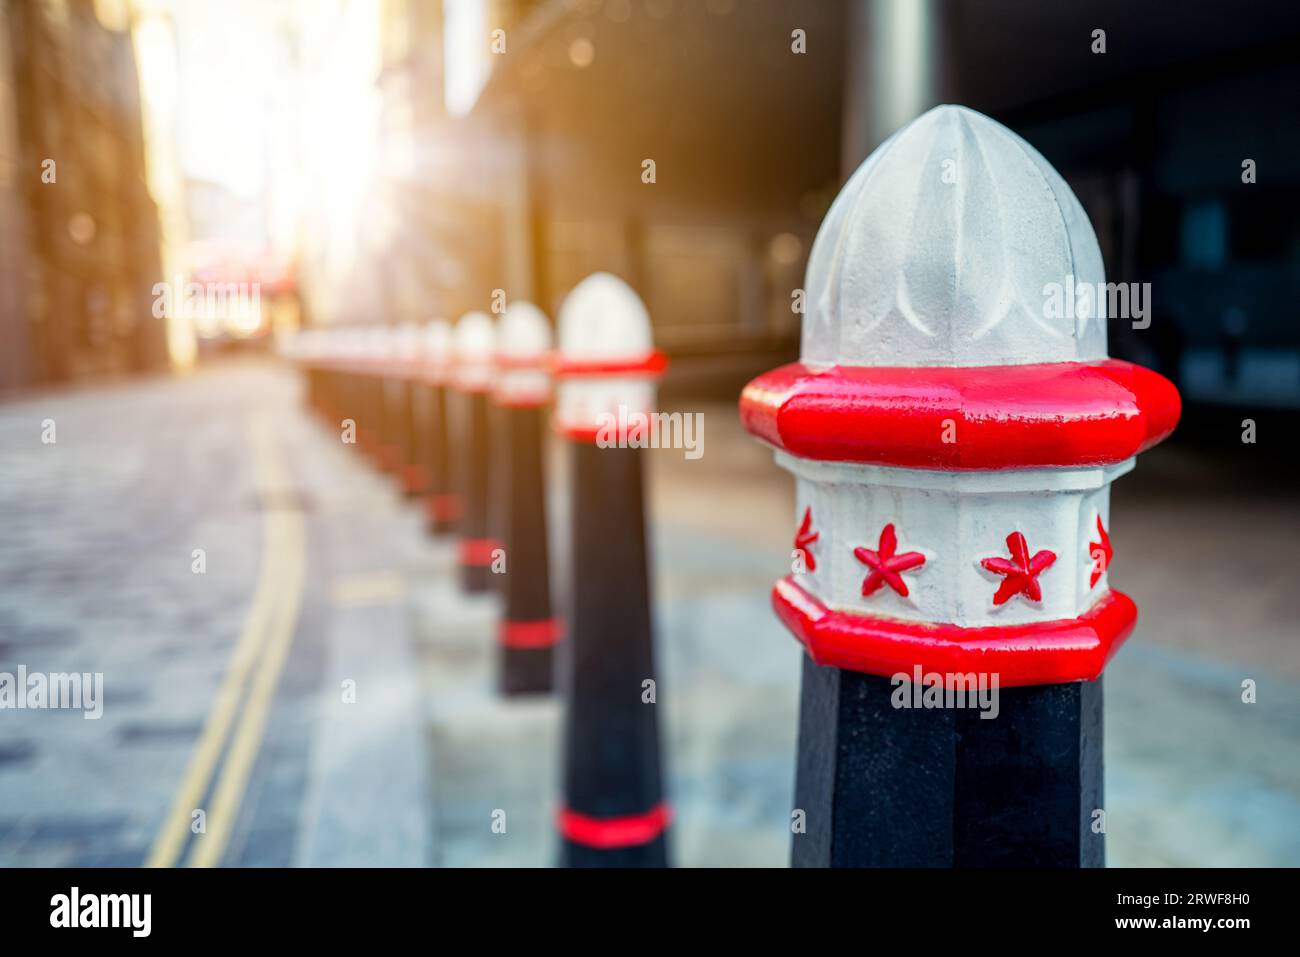 Traditional old-fashioned street bollards in London, UK. The cast iron Victorian style bollards are in the City streets, shown here with a sunshine ba Stock Photo